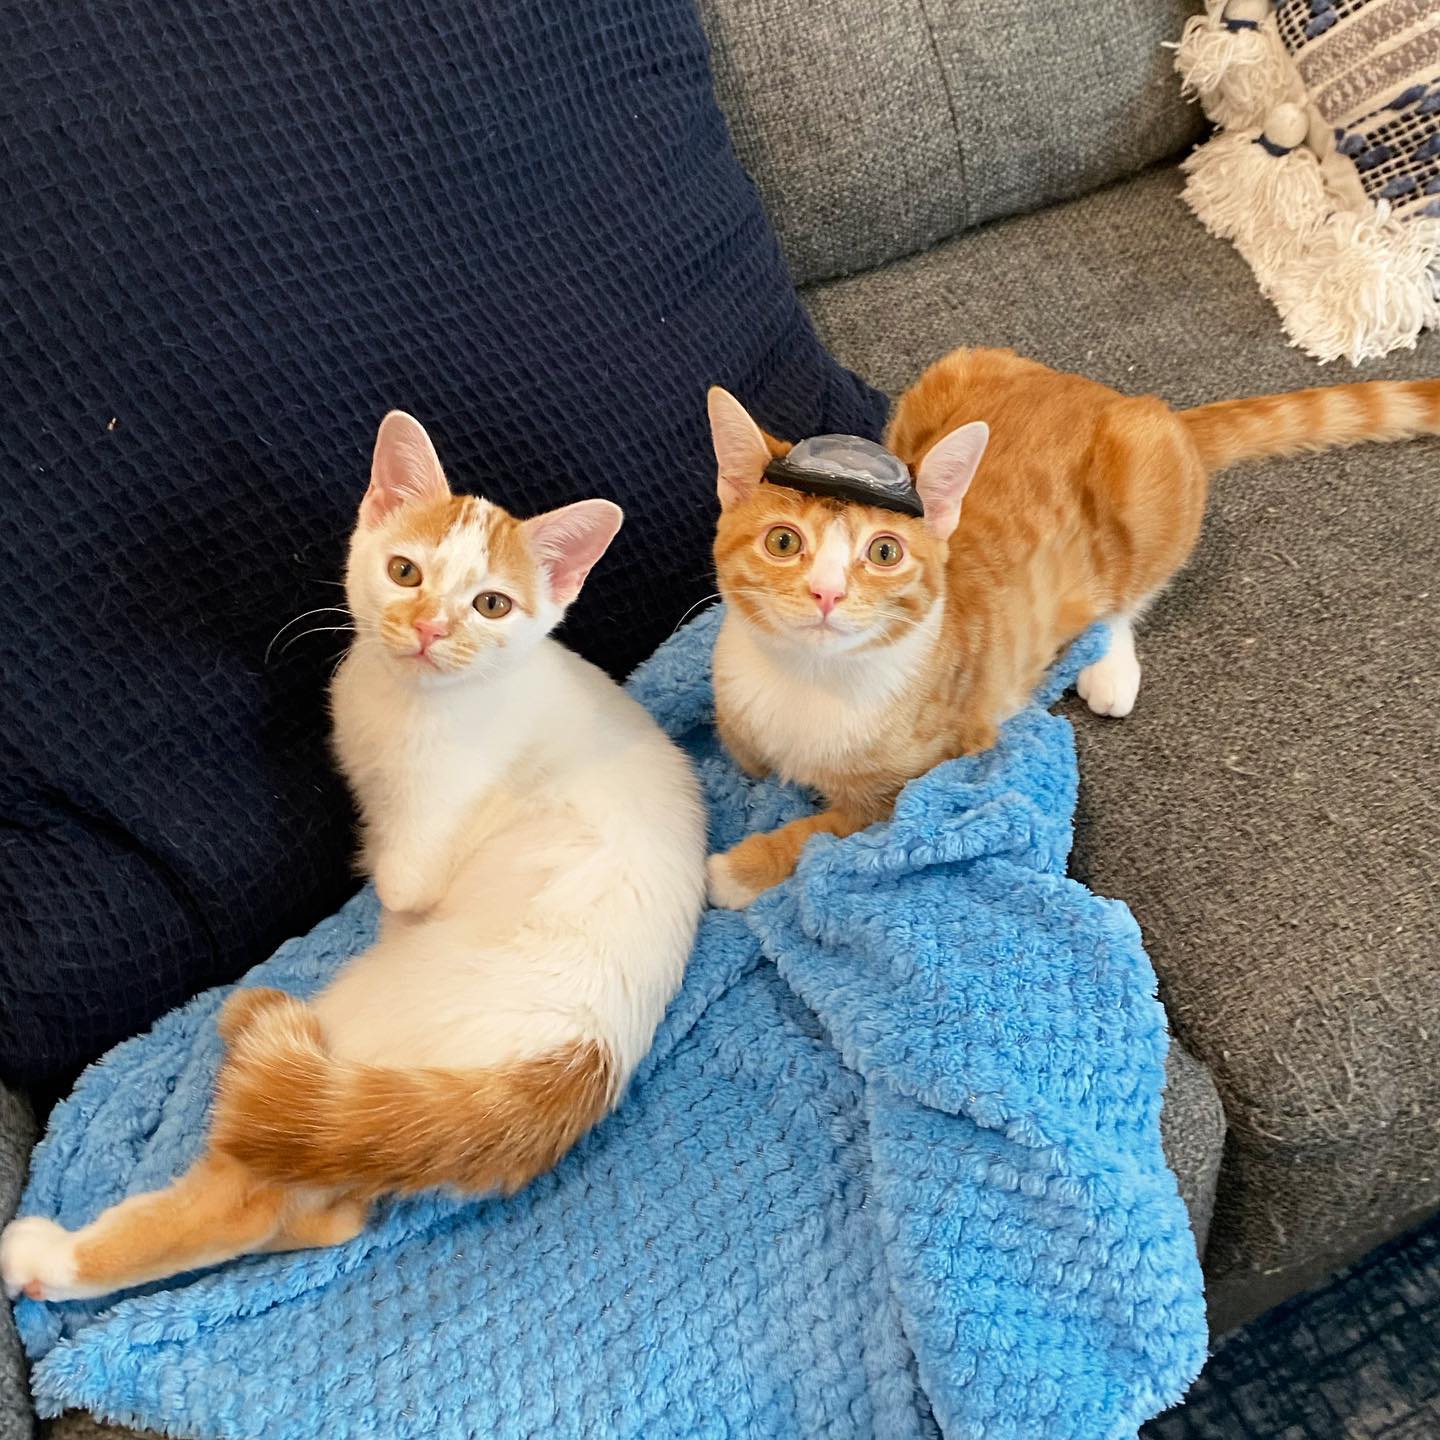 These Two Sibling Kittens Are Quite Different From Other Cats, But They Are Living Their Life To The Fullest After Being Rescued